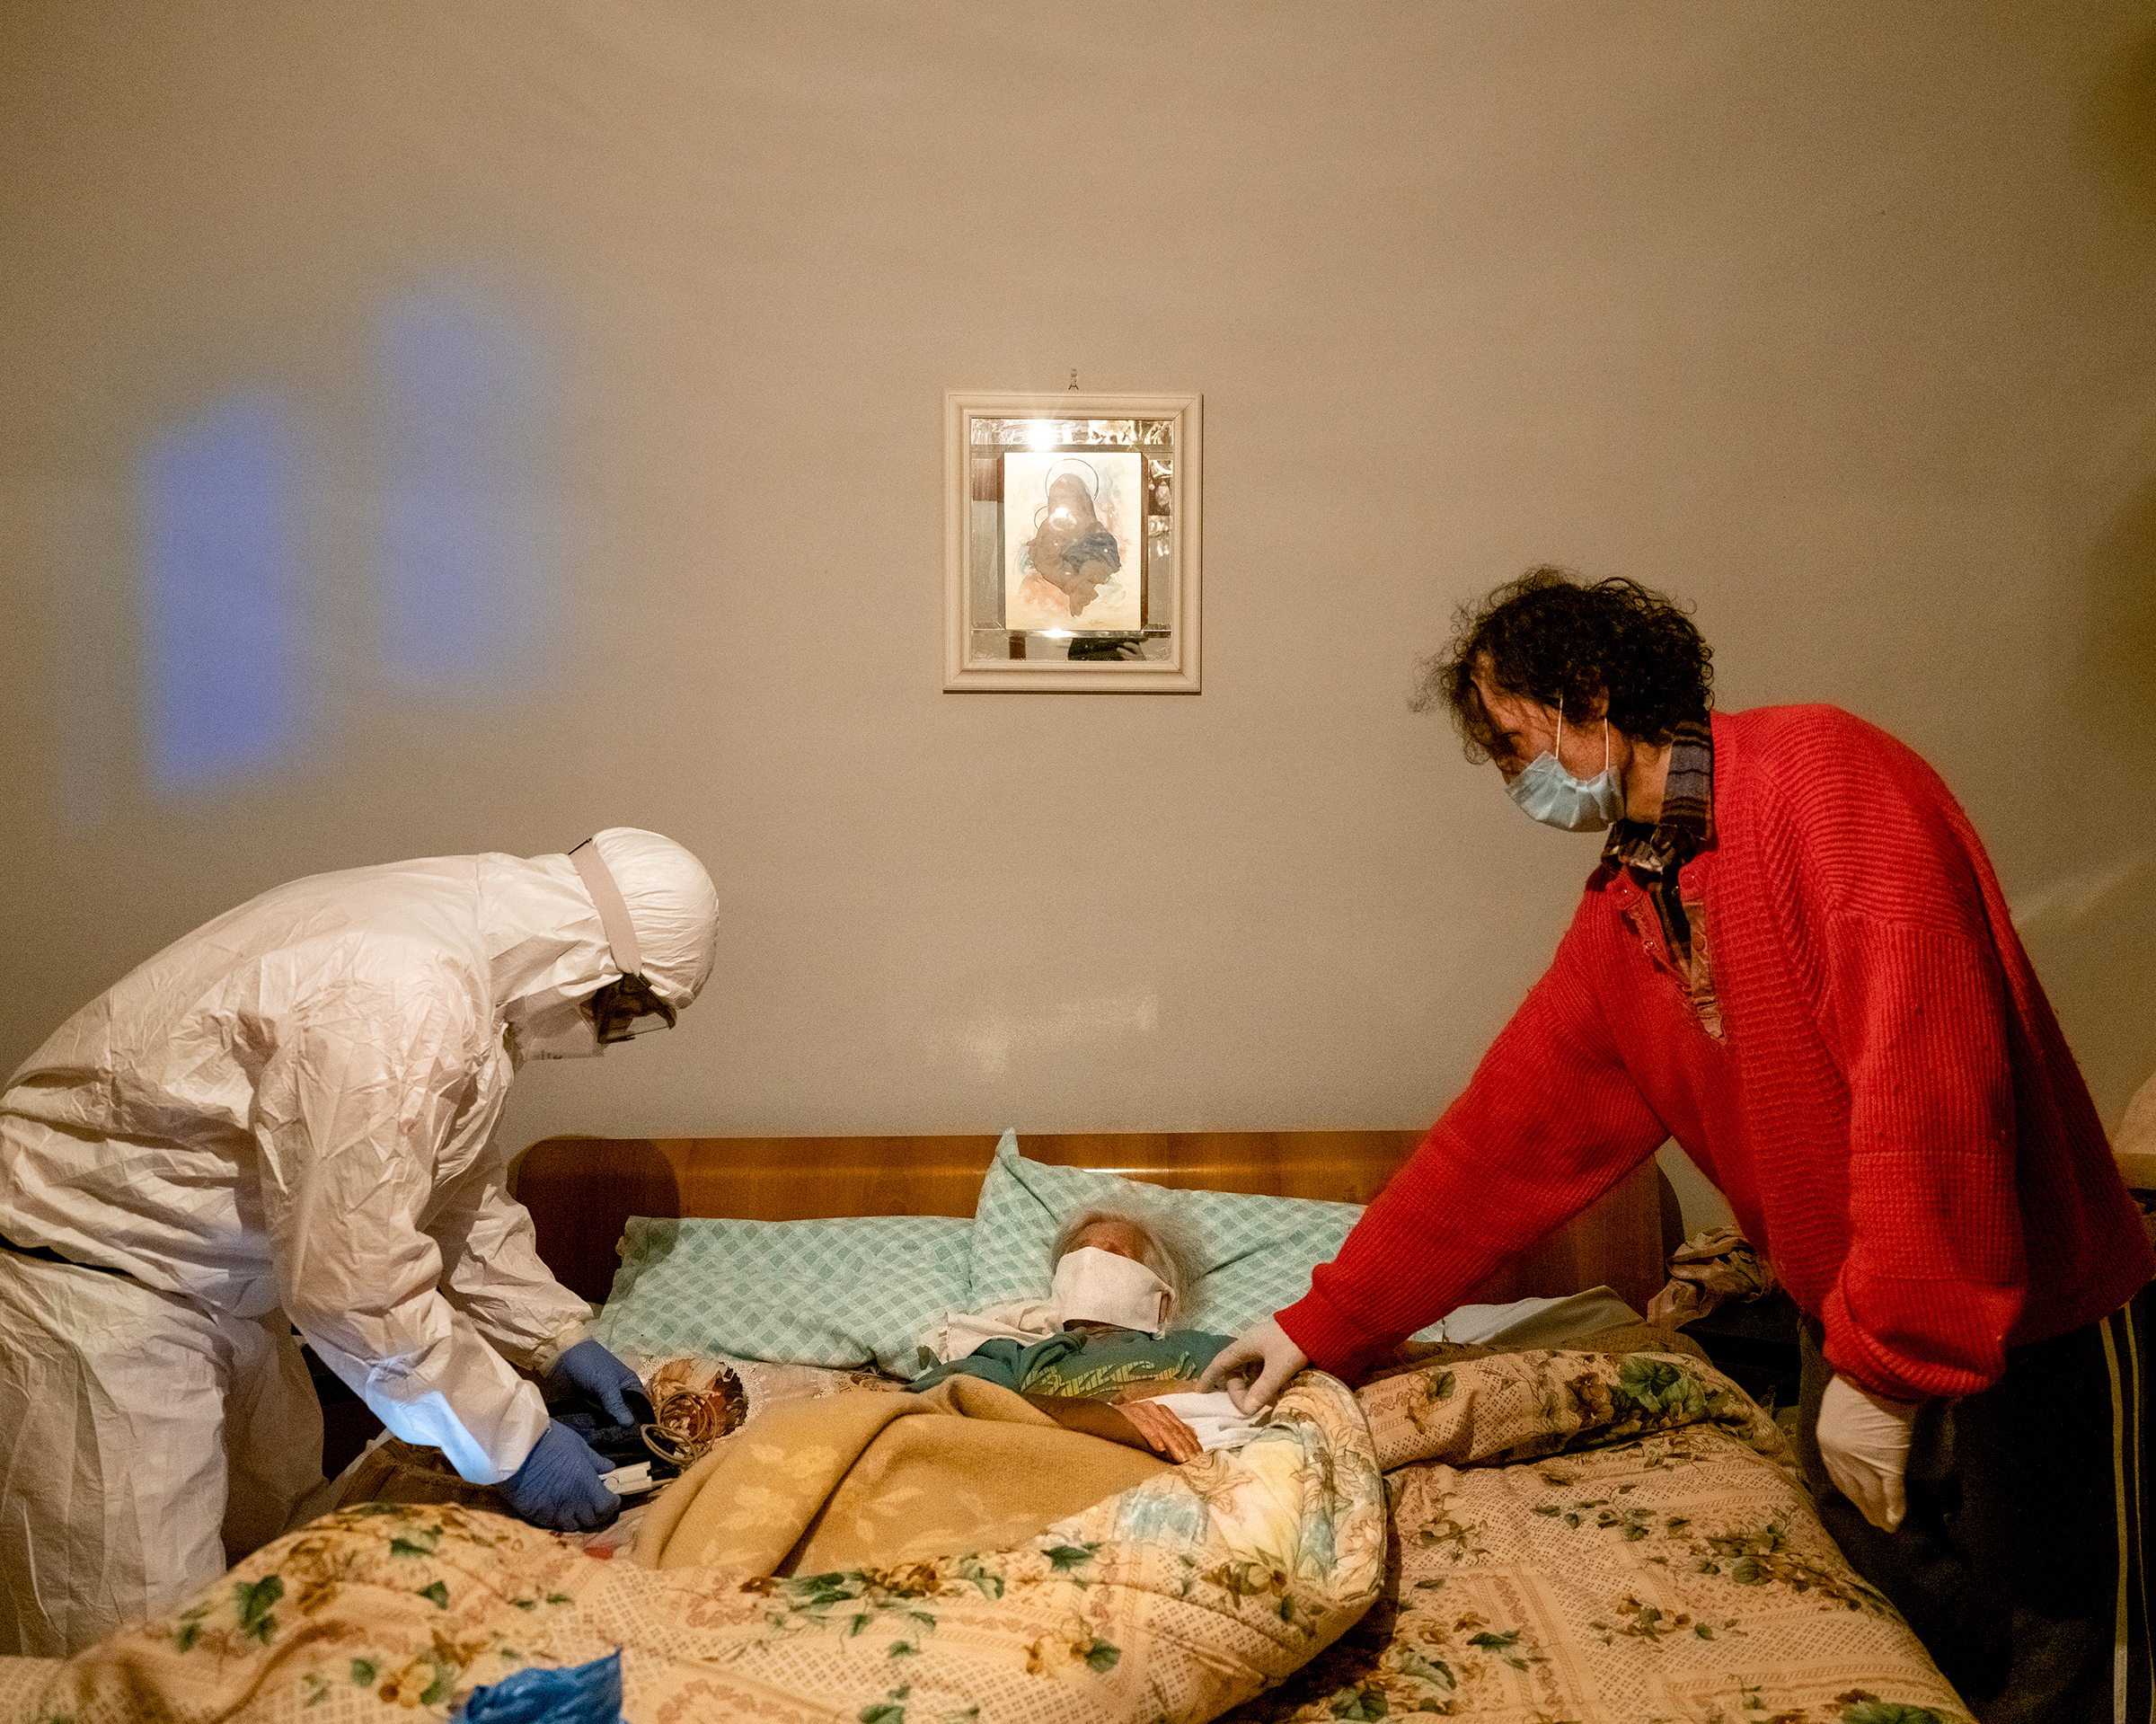 A health worker <a href="https://time.com/5822233/italy-coronavirus-photos/" target="_blank" rel="noopener noreferrer">checks an elderly woman's oxygen level</a>, after receiving a call about a suspected COVID-19 case, in the northern Italian province of Bergamo. (Lorenzo Meloni—Magnum Photos for TIME)